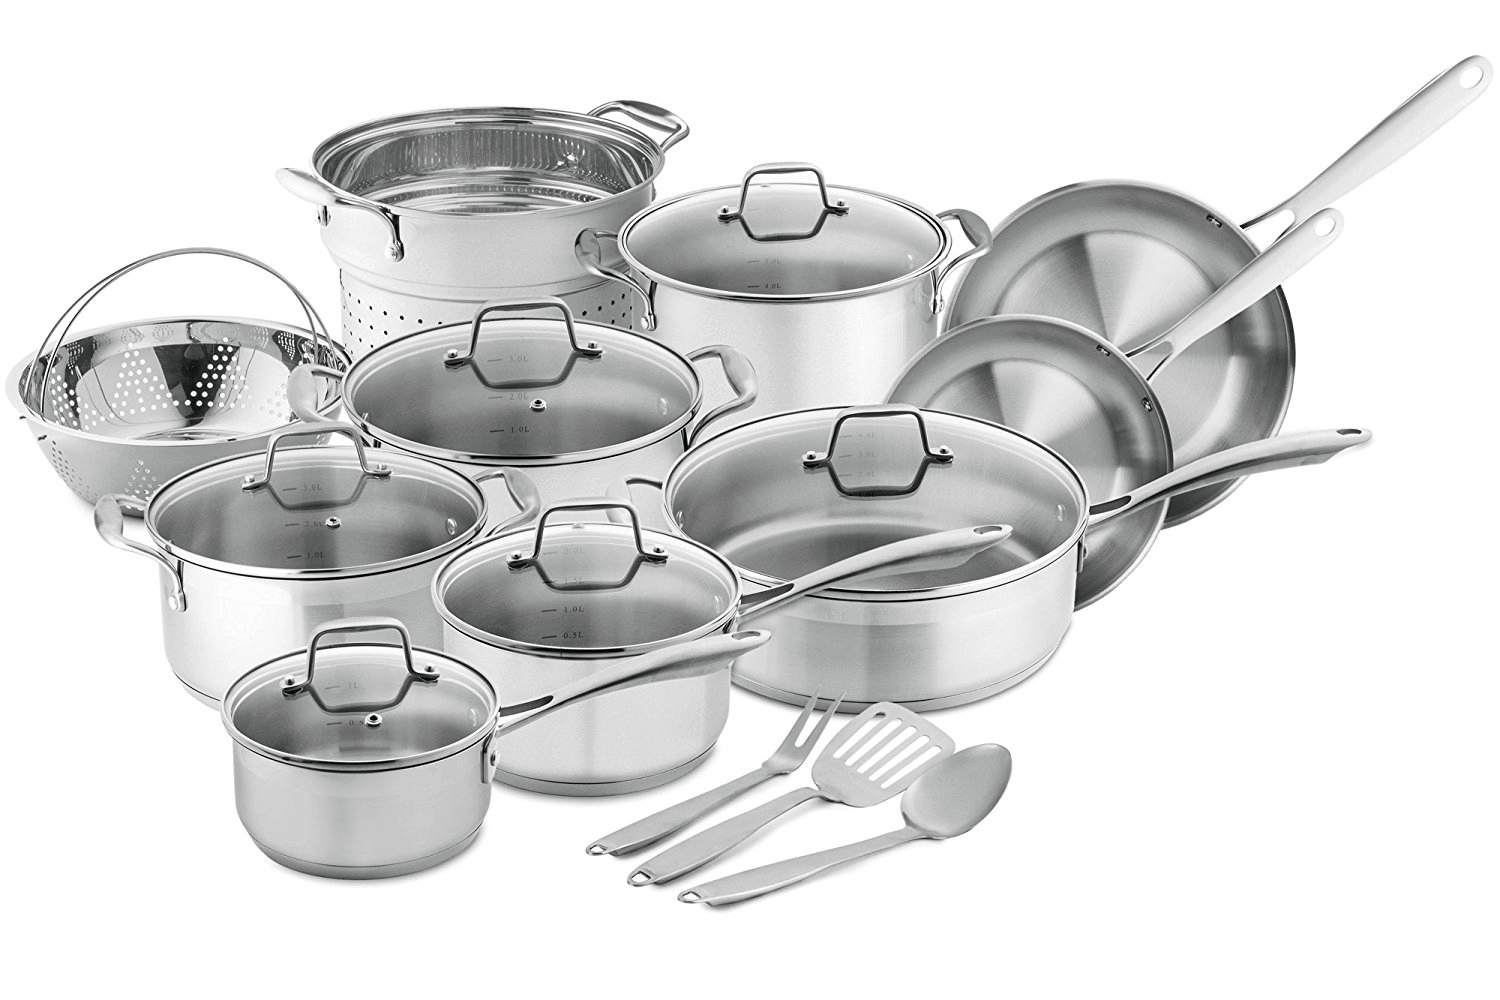 Chef’s Star Professional Grade Stainless Steel 17 Piece Pots Pans Set